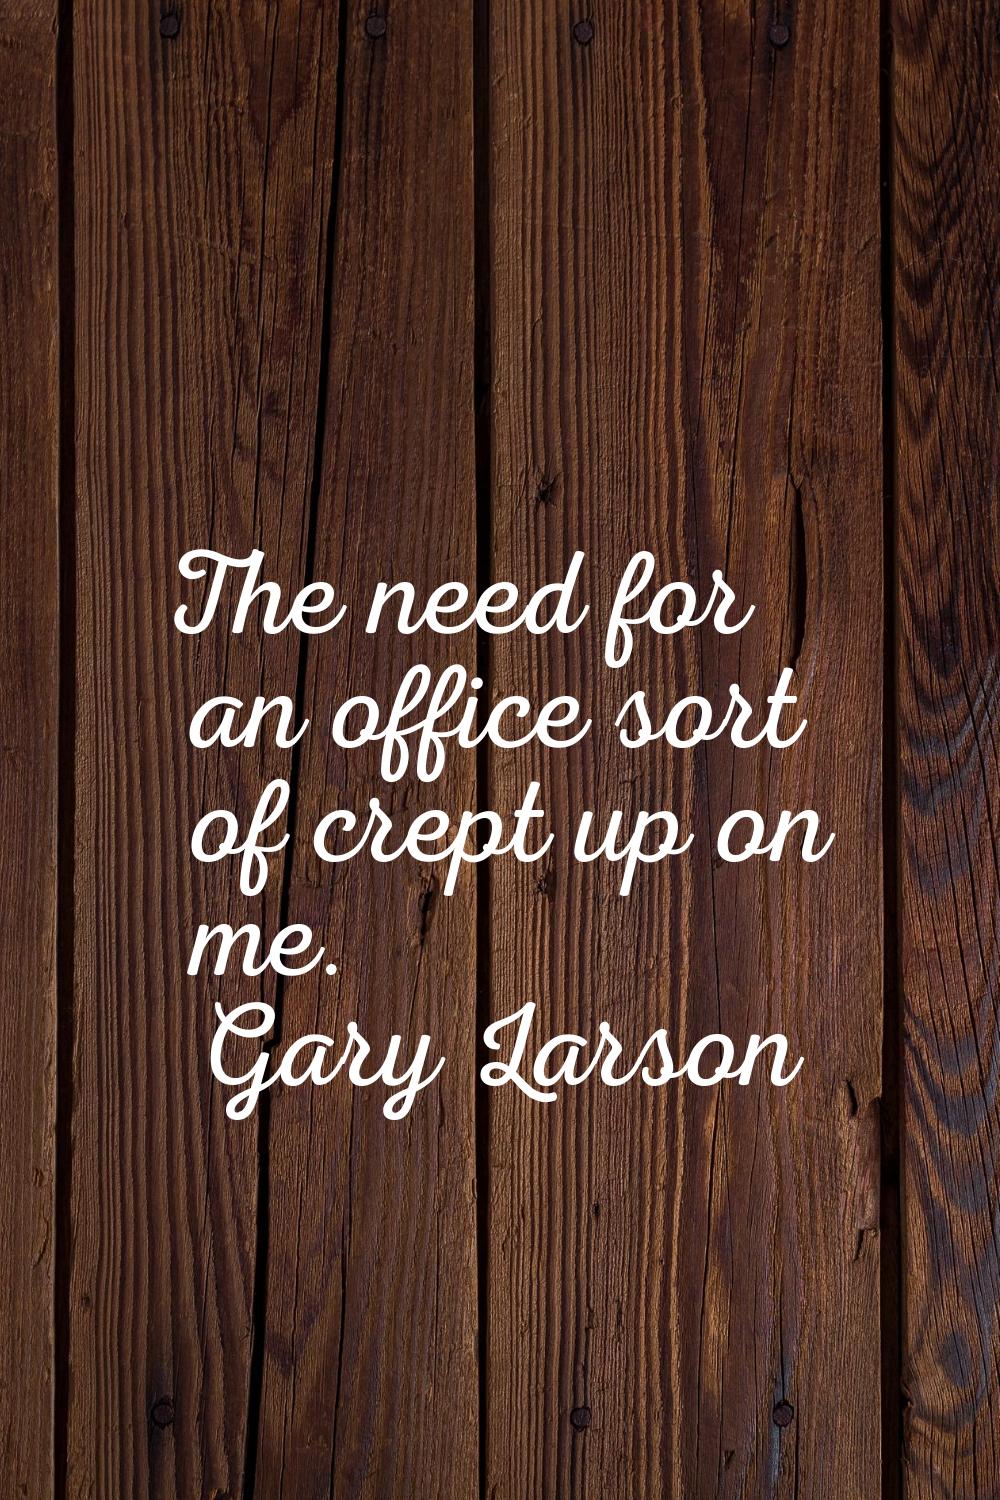 The need for an office sort of crept up on me.